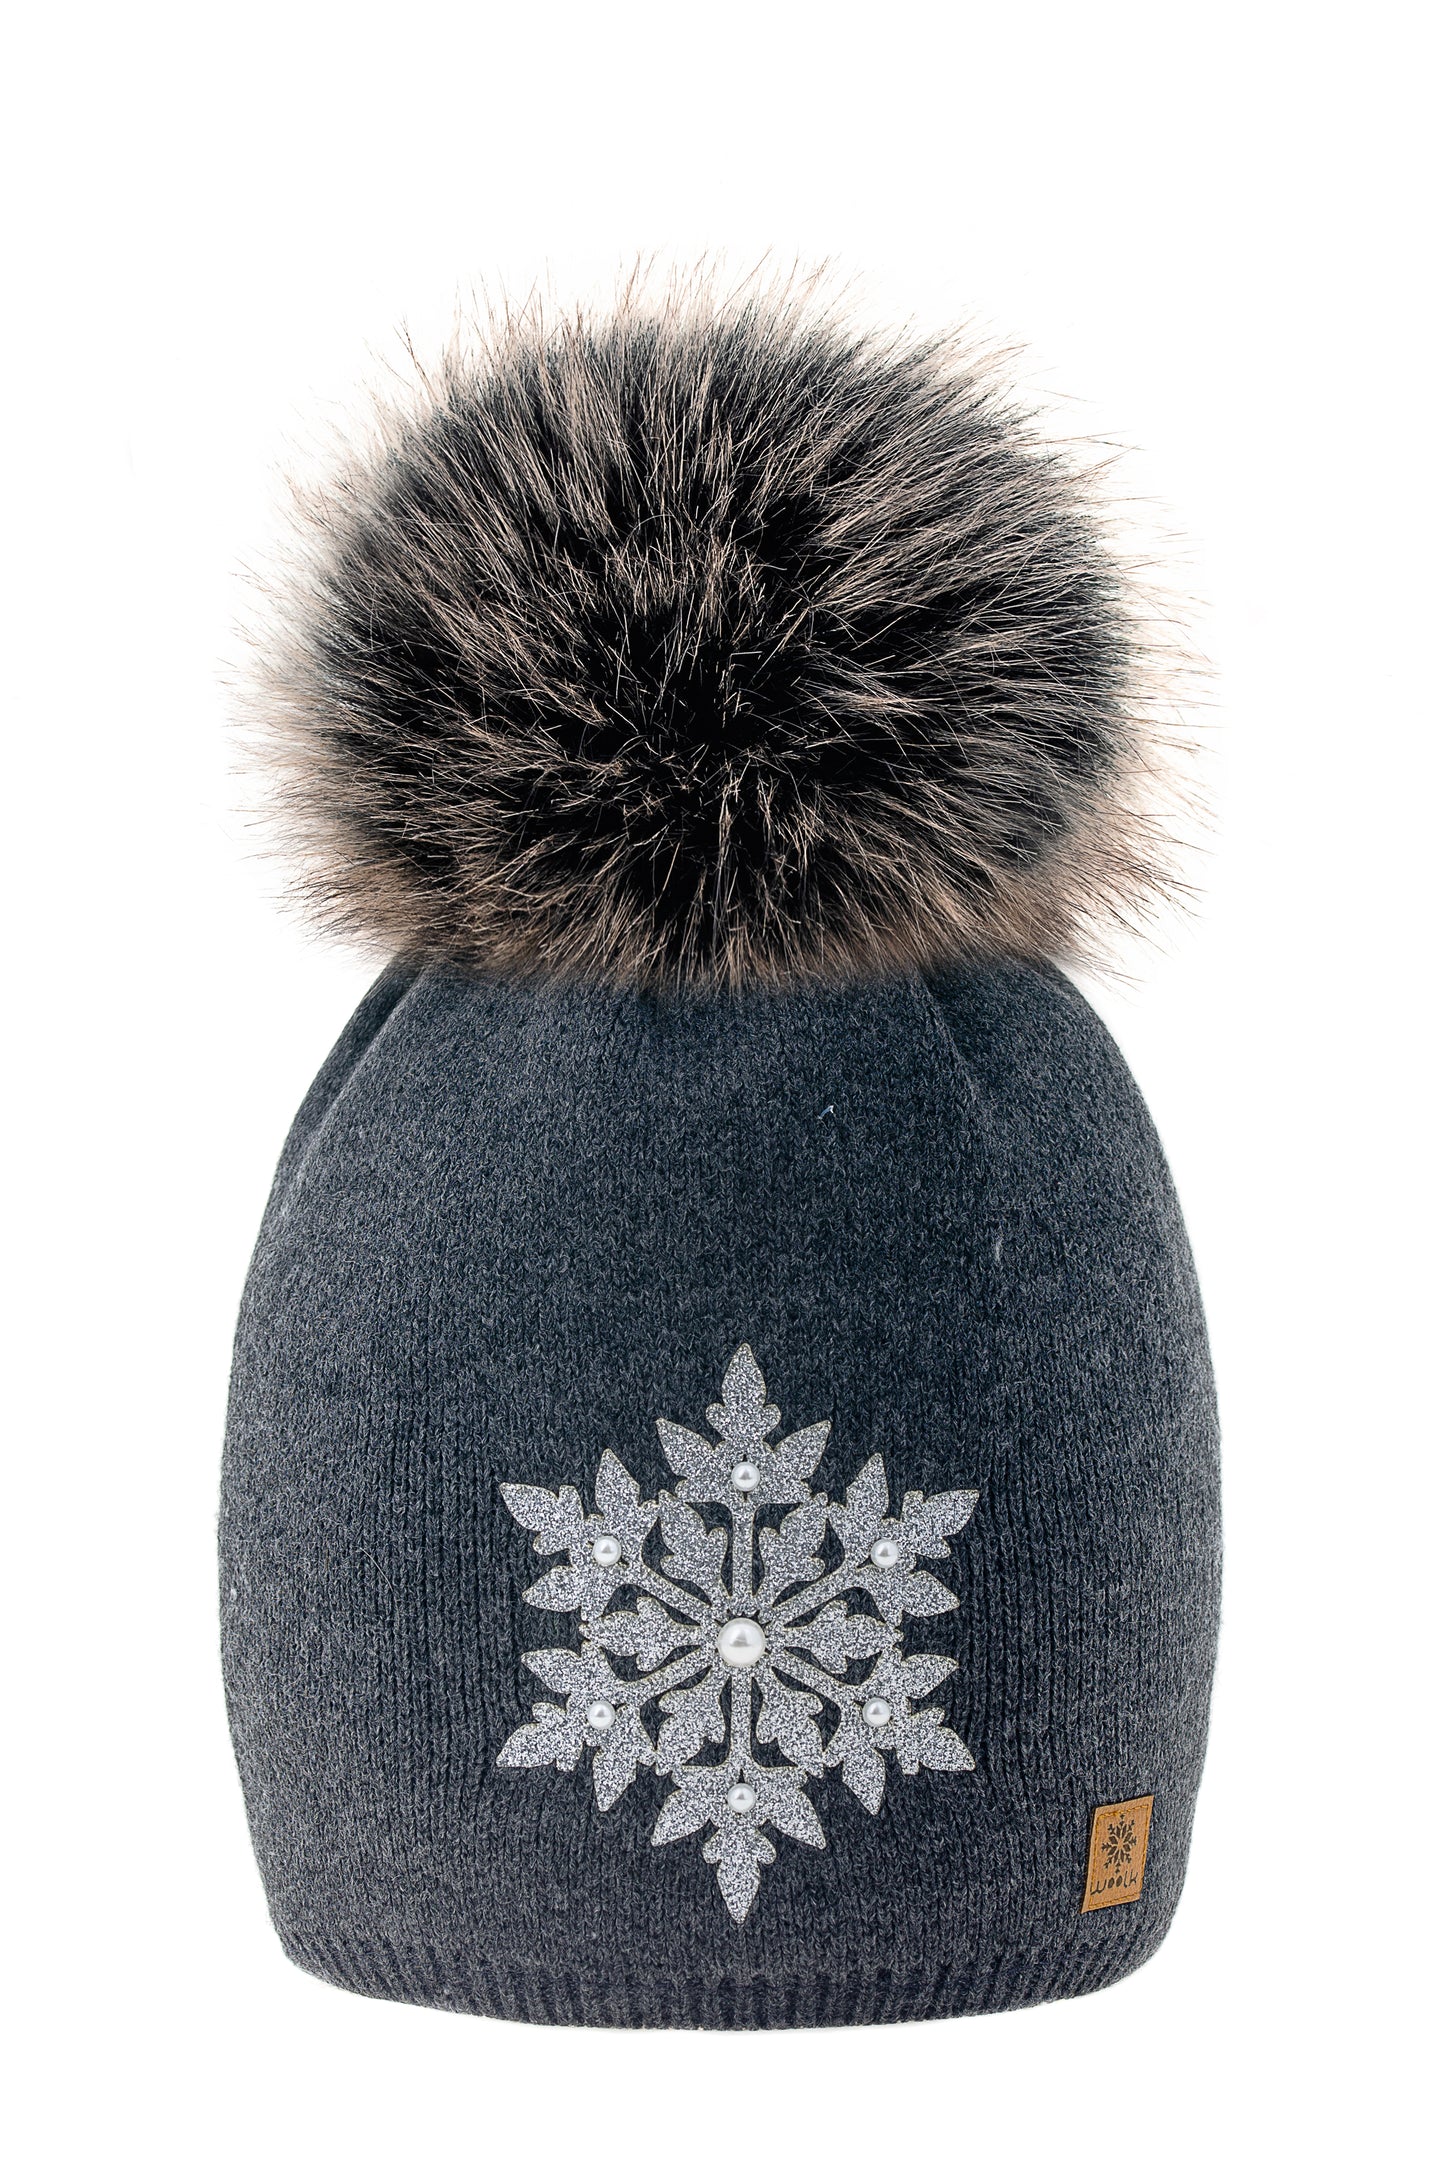 Medireach Inc. Grey Snowflakes available at The Good Life Boutique